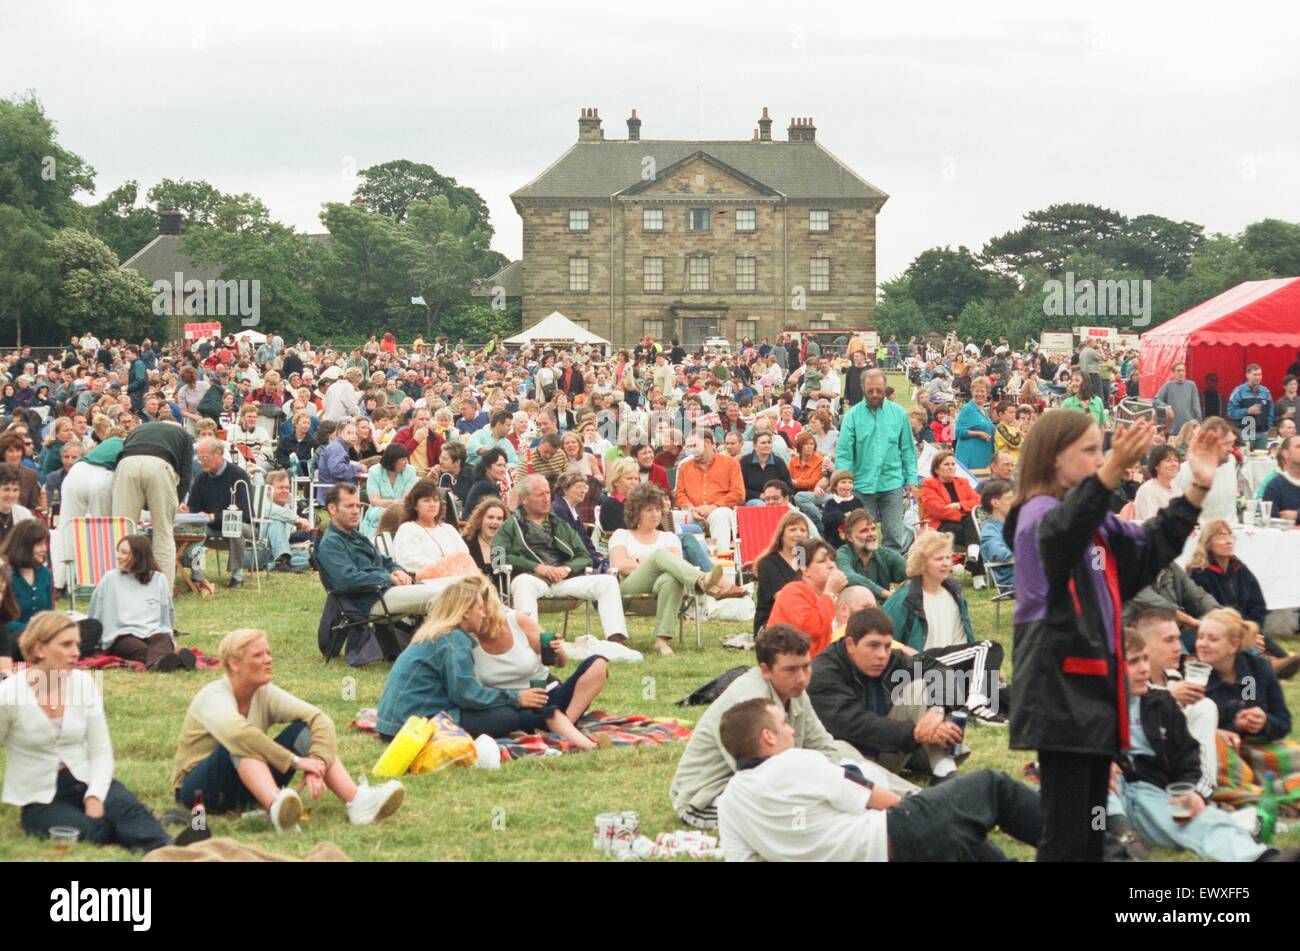 A 60's and 70's concert featuring look-a-like bands Beatlemania and Bjorn Again was held at Ormesby Hall on Saturday night in front of a crowd of around 3000. 6th July 1998. Stock Photo